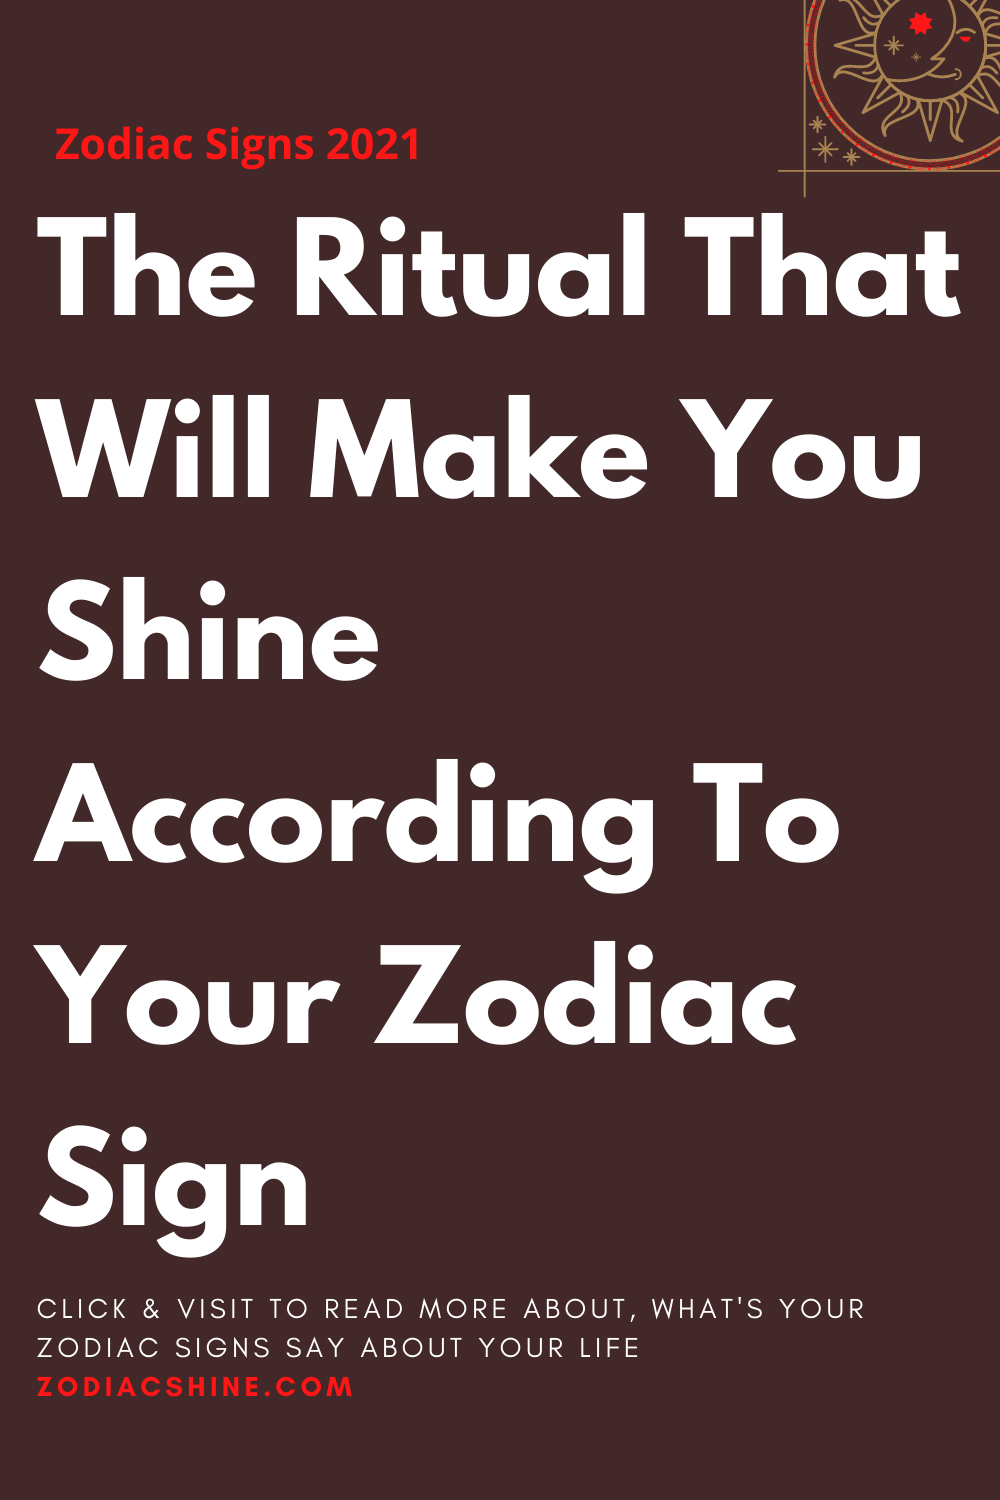 The Ritual That Will Make You Shine According To Your Zodiac Sign